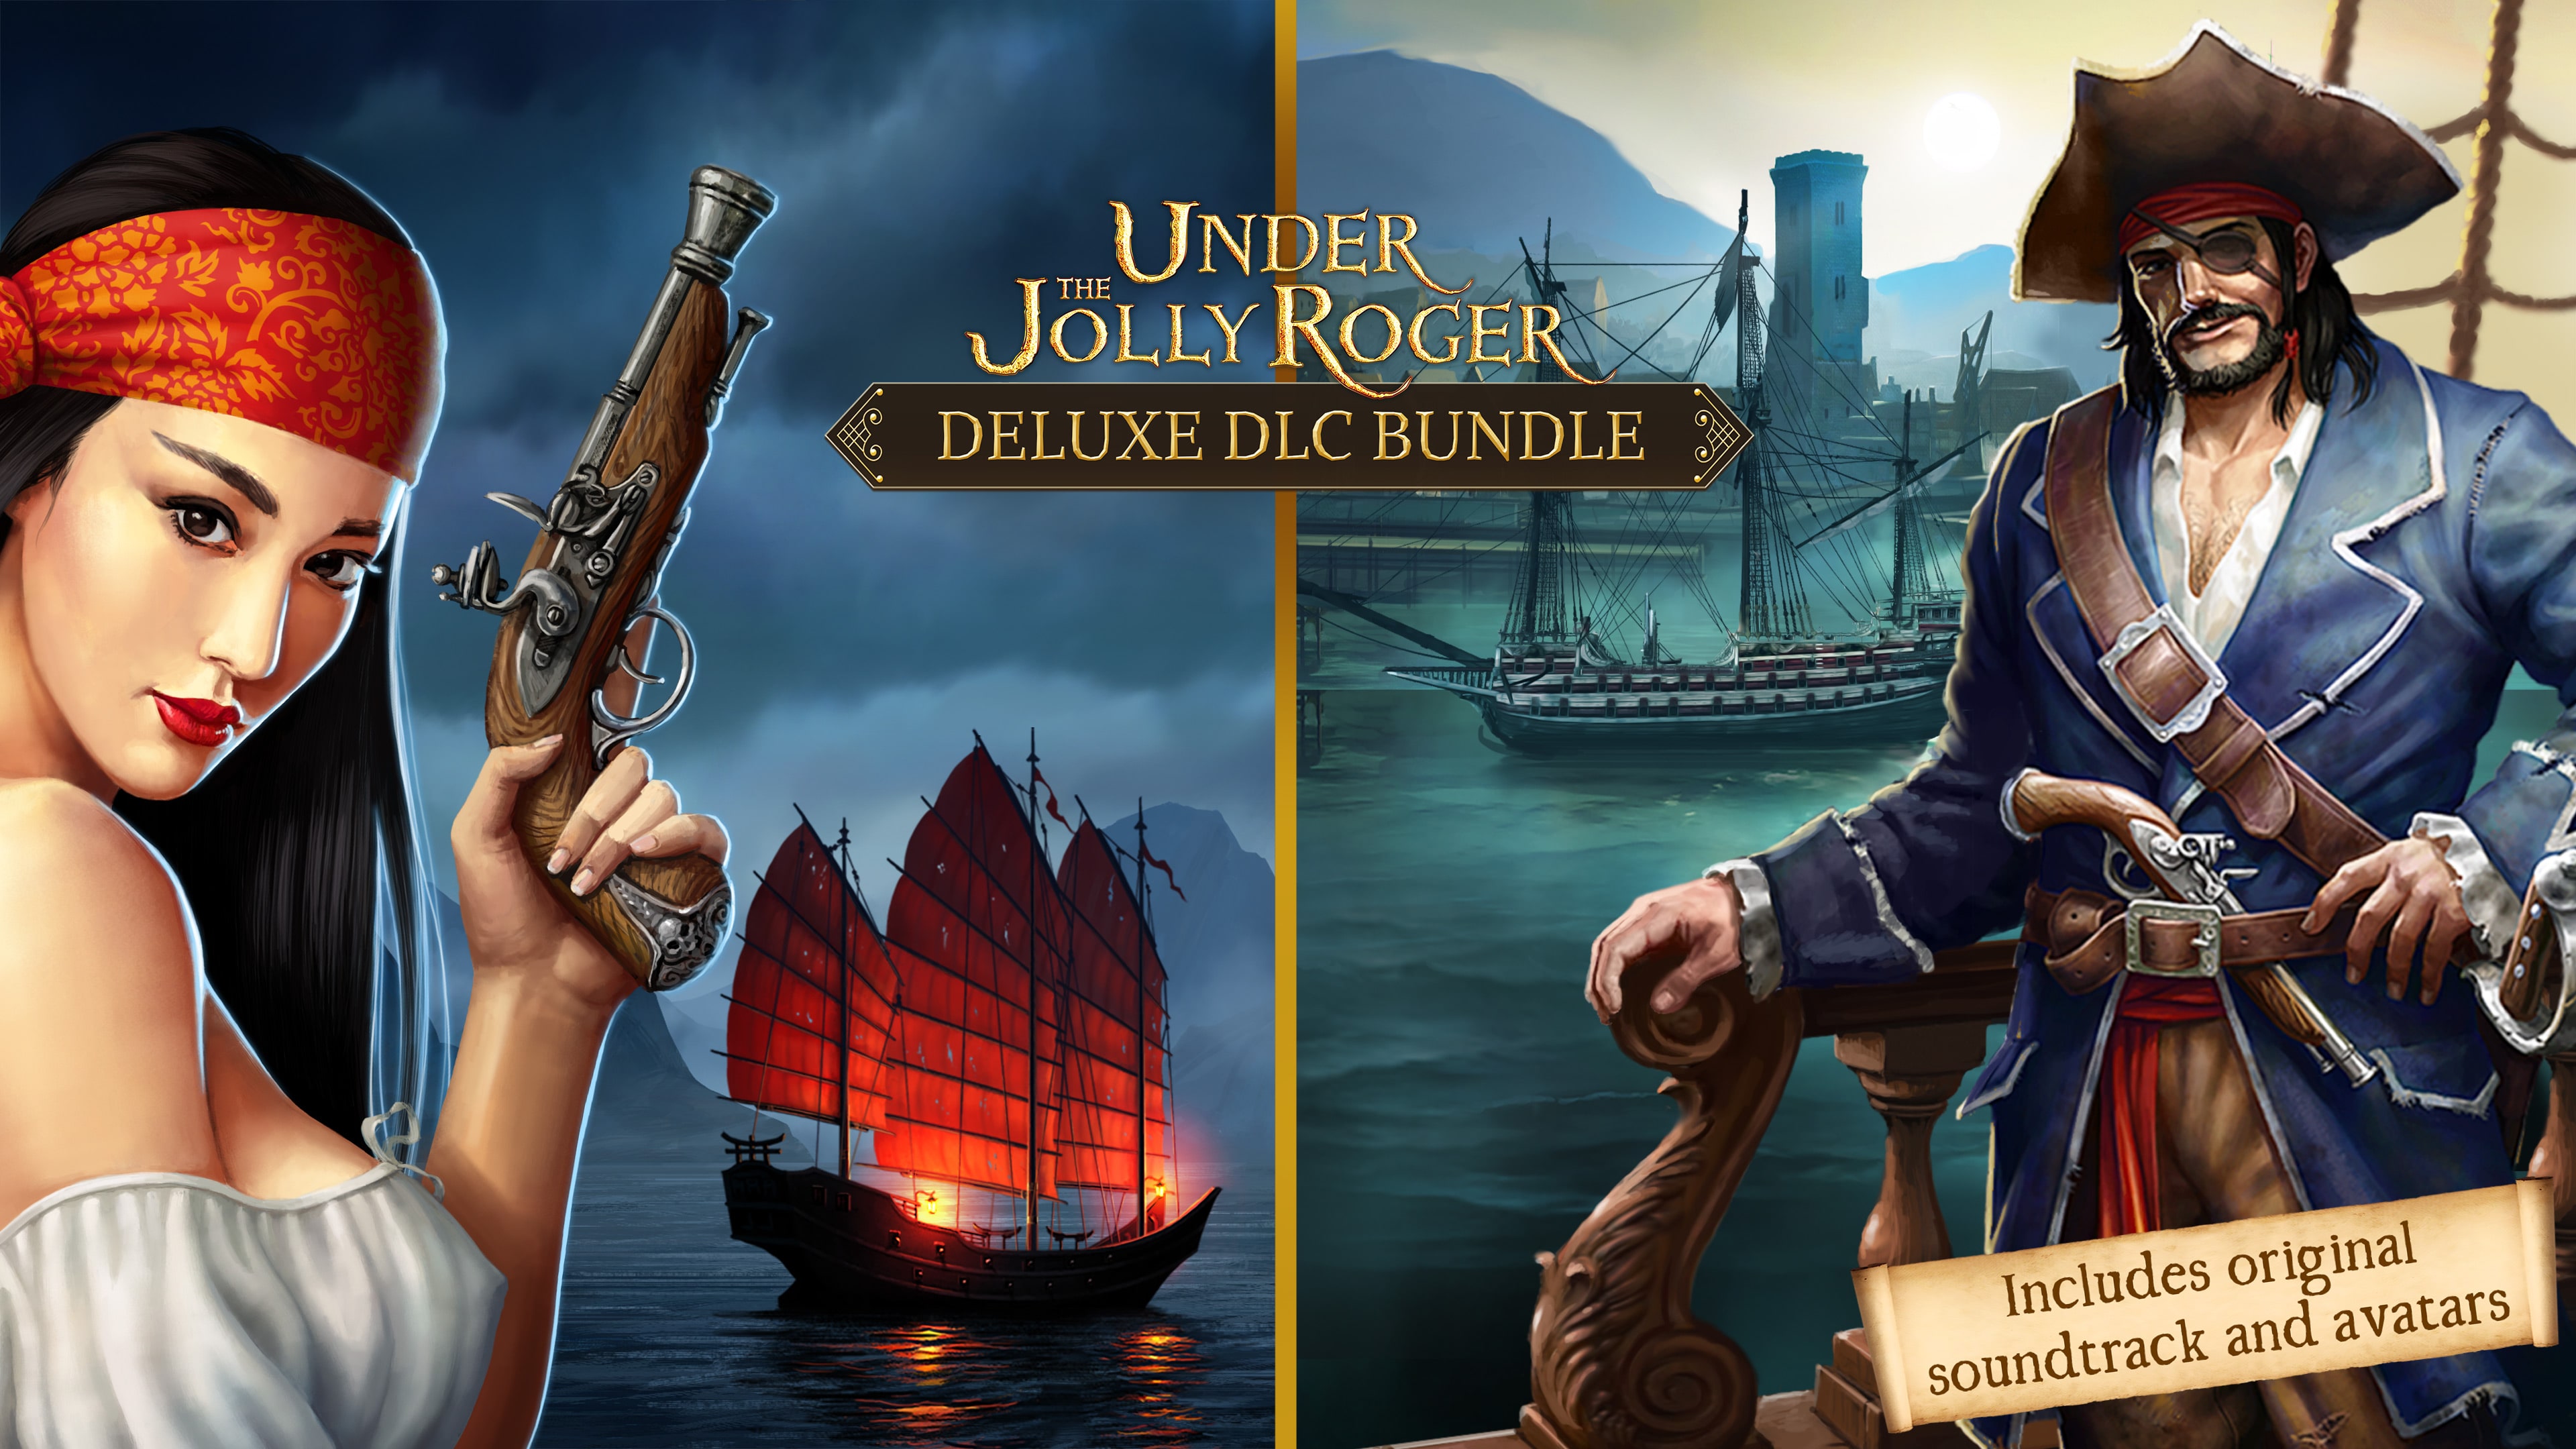 Under the Jolly Roger - Deluxe DLC Bundle (Simplified Chinese, English, Japanese)